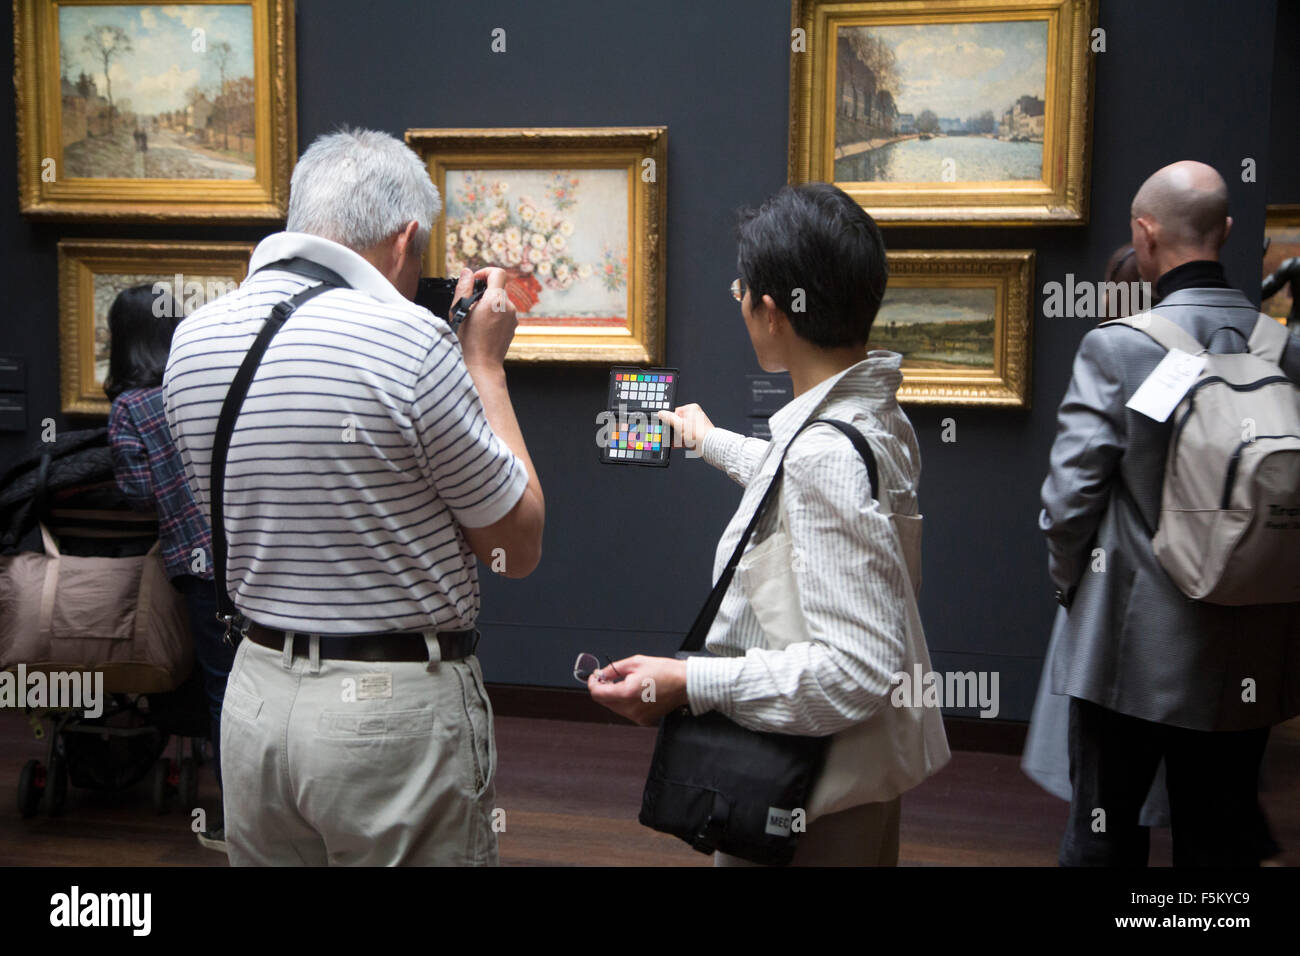 photographer in musee d'orsay, paris france checks colour temperature with chart Stock Photo